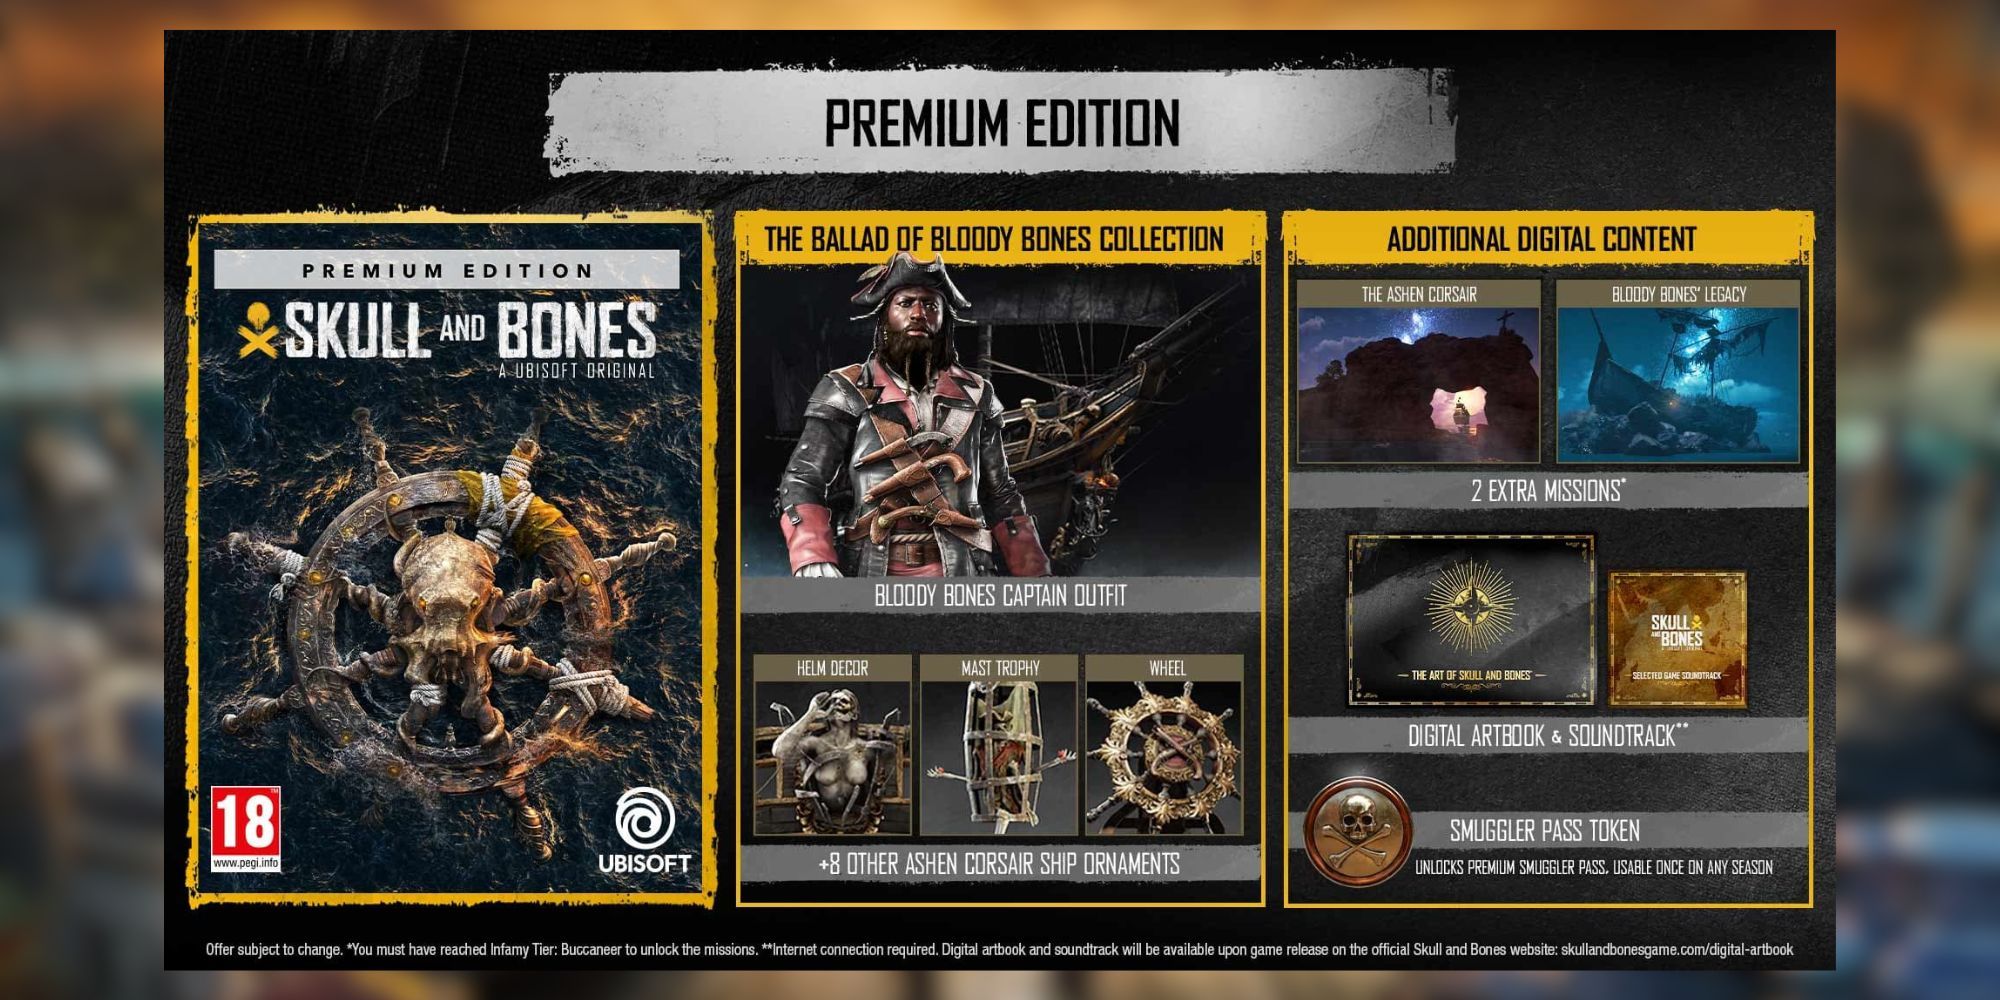 Product still of the Skull and Bones Premium Edition and its contents